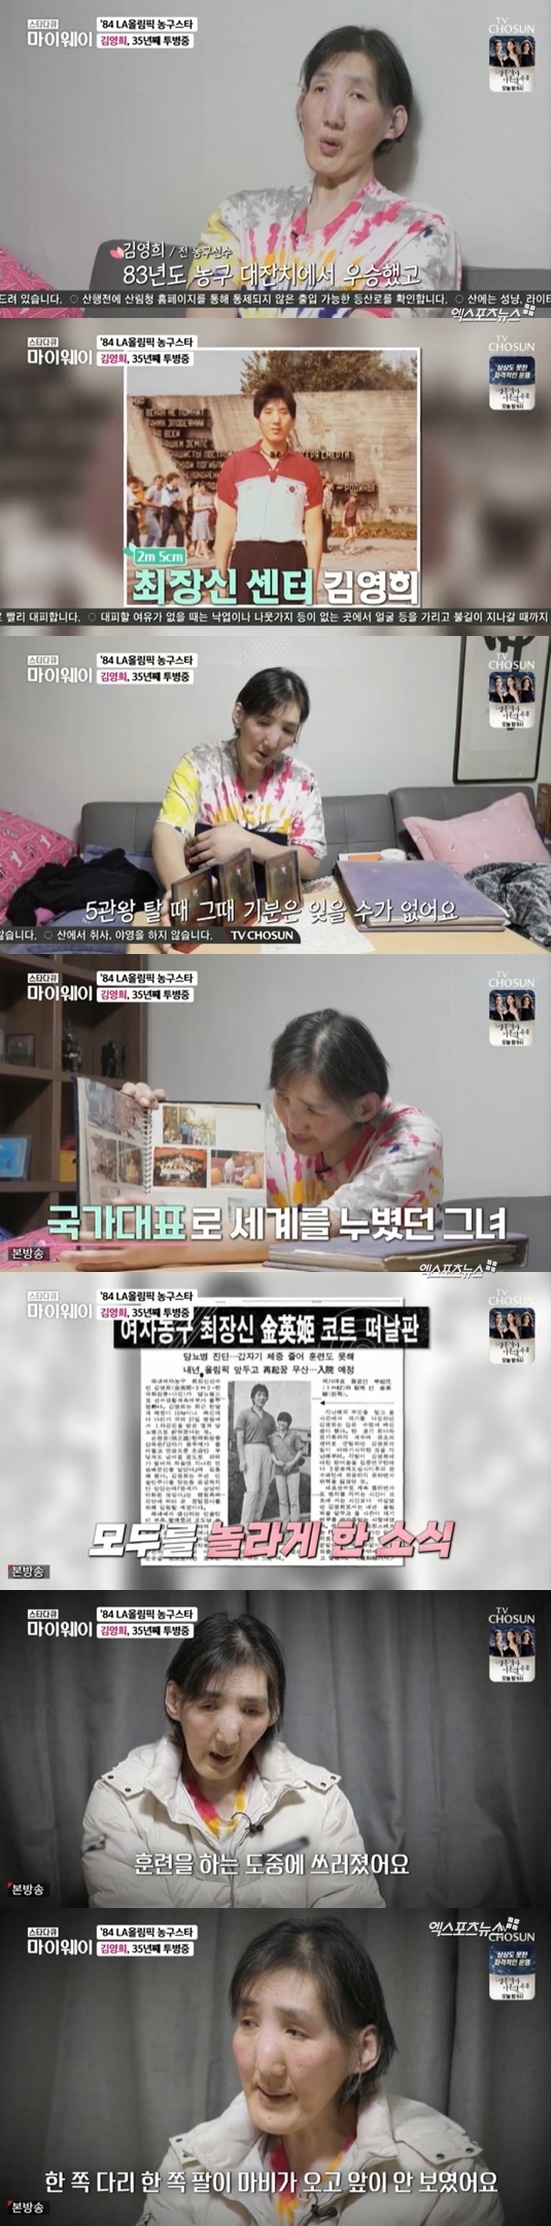 My Way Kim Yeong-hee mentioned the past that got sick.TV CHOSUN star documentary myway broadcasted on the 6th appeared in the basketball legend Kim Yeong-hee, who made a mark in the history of Korean womens basketball in the 80s.Kim Yeong-hee is 2m 5cm tall and played a leading role in the 1984 Los Angeles (LA) Olympic silver medal.However, during his prime, he was diagnosed with a rare disease called malline hypertrophy. He was rapidly worsened by a cerebral hemorrhage and suddenly left the court without a retirement game.The complications that I got while fighting the illness made my behavior uncomfortable, and it was difficult to move from the room without help from someone.He said: I won the basketball grand prix in 1983 and won five titles: I won the scoring, rebound, Yatu shot rate, the best, and the popularity.It was said that the elephants that were broadcast in the newspaper turned into elephants that carried them. It was a good time for me, even though I was strong. Kim Yeong-hee said, I trained in the athletes village for the 88 Seoul Olympics, and I fell down while training, and I was paralyzed, one leg, one arm paralyzed and I could not see.He went to a designated hospital and had a big bump on his head, and he was sentenced to death if he had trained a little more.I told him to choose between death and exercise. Photo: TV CHOSUN broadcast screen